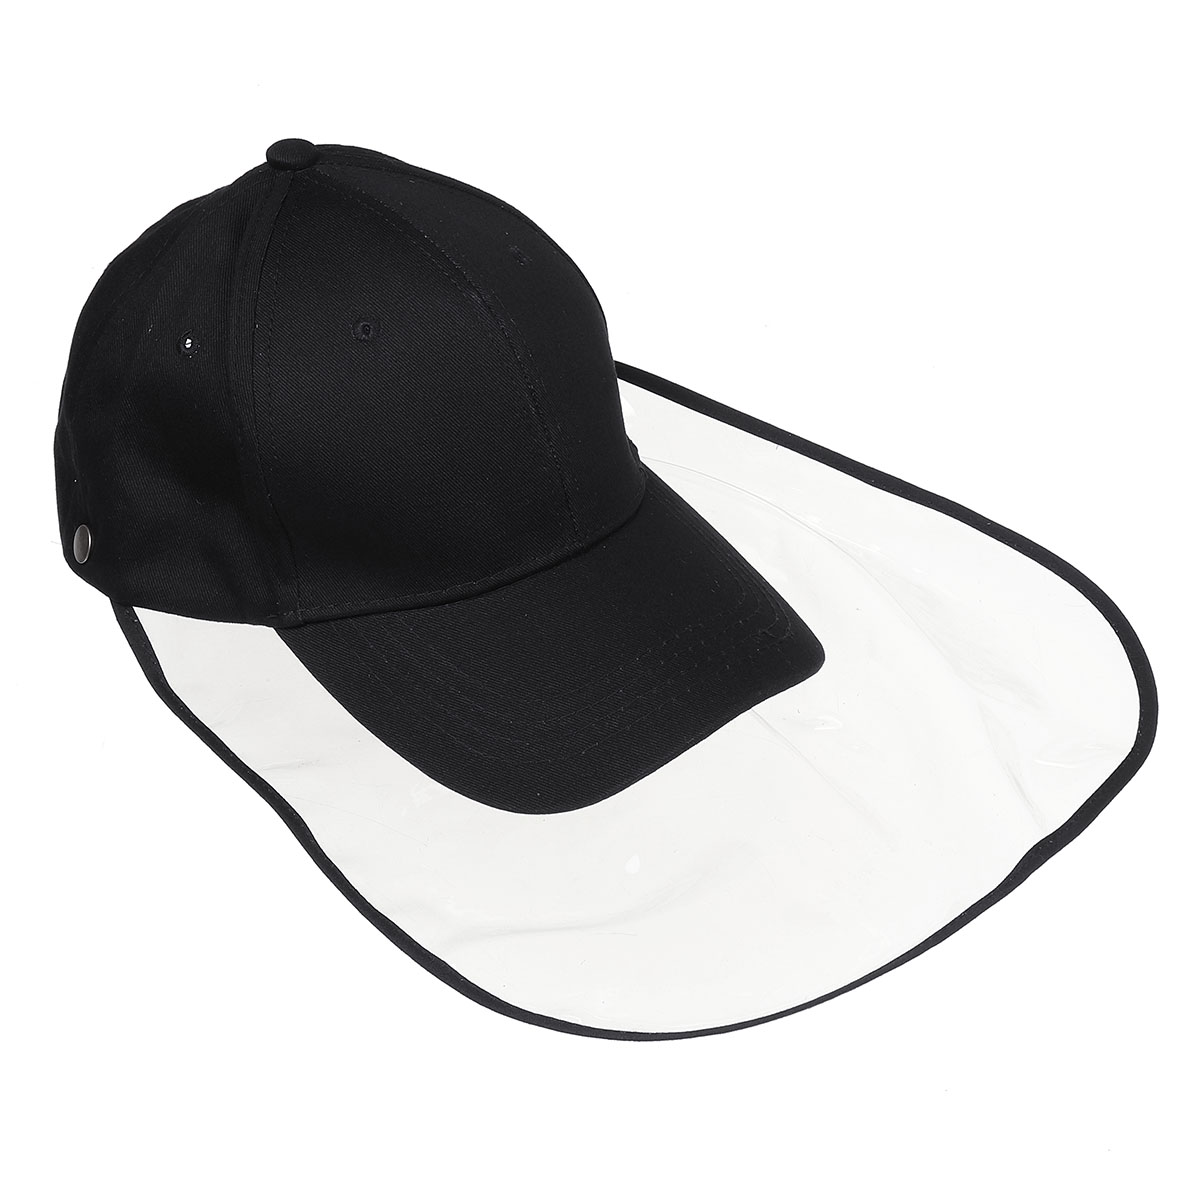 Clear-Full-Face-Hat-Waterproof-Cover-Mask-Cap-Shield-Protective-Anti-spitting-1659895-4